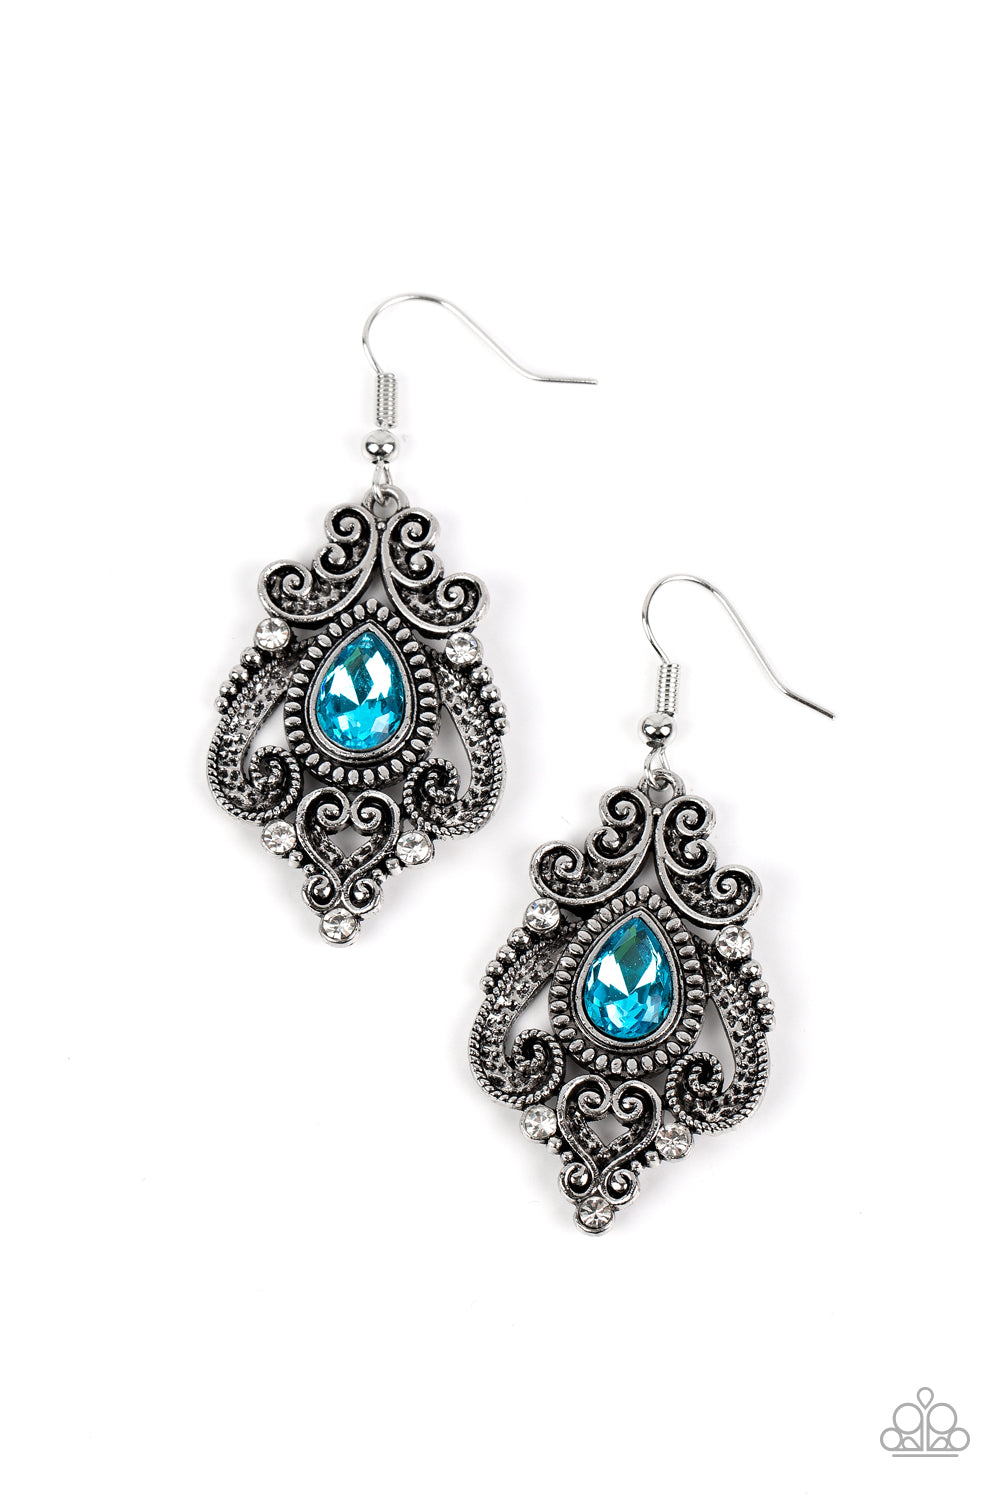 Paparazzi Palace Perfection - Blue Earrings